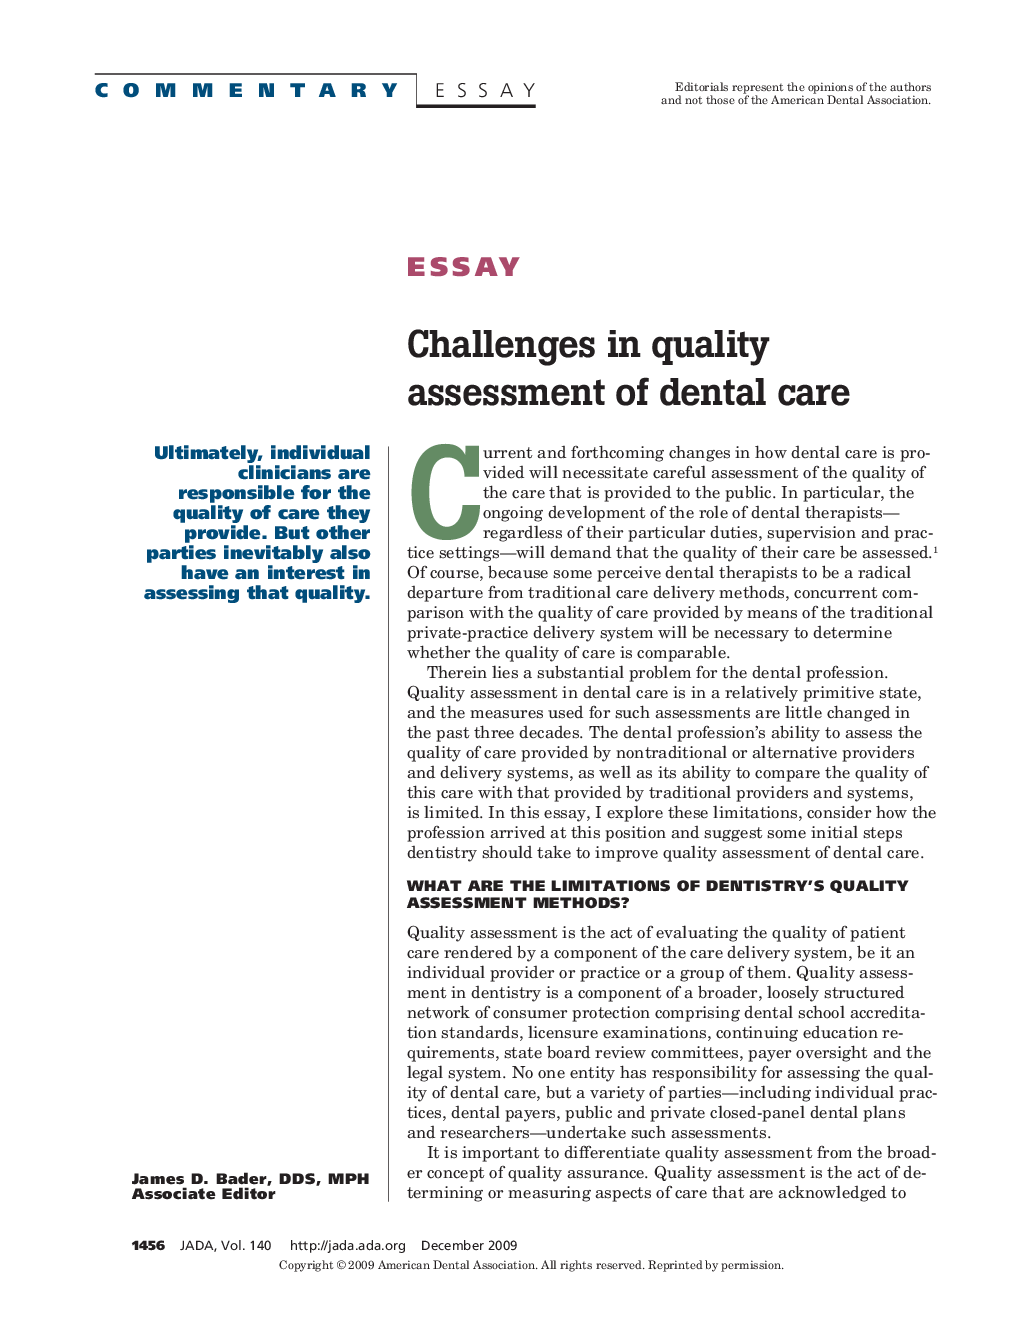 Challenges in quality assessment of dental care